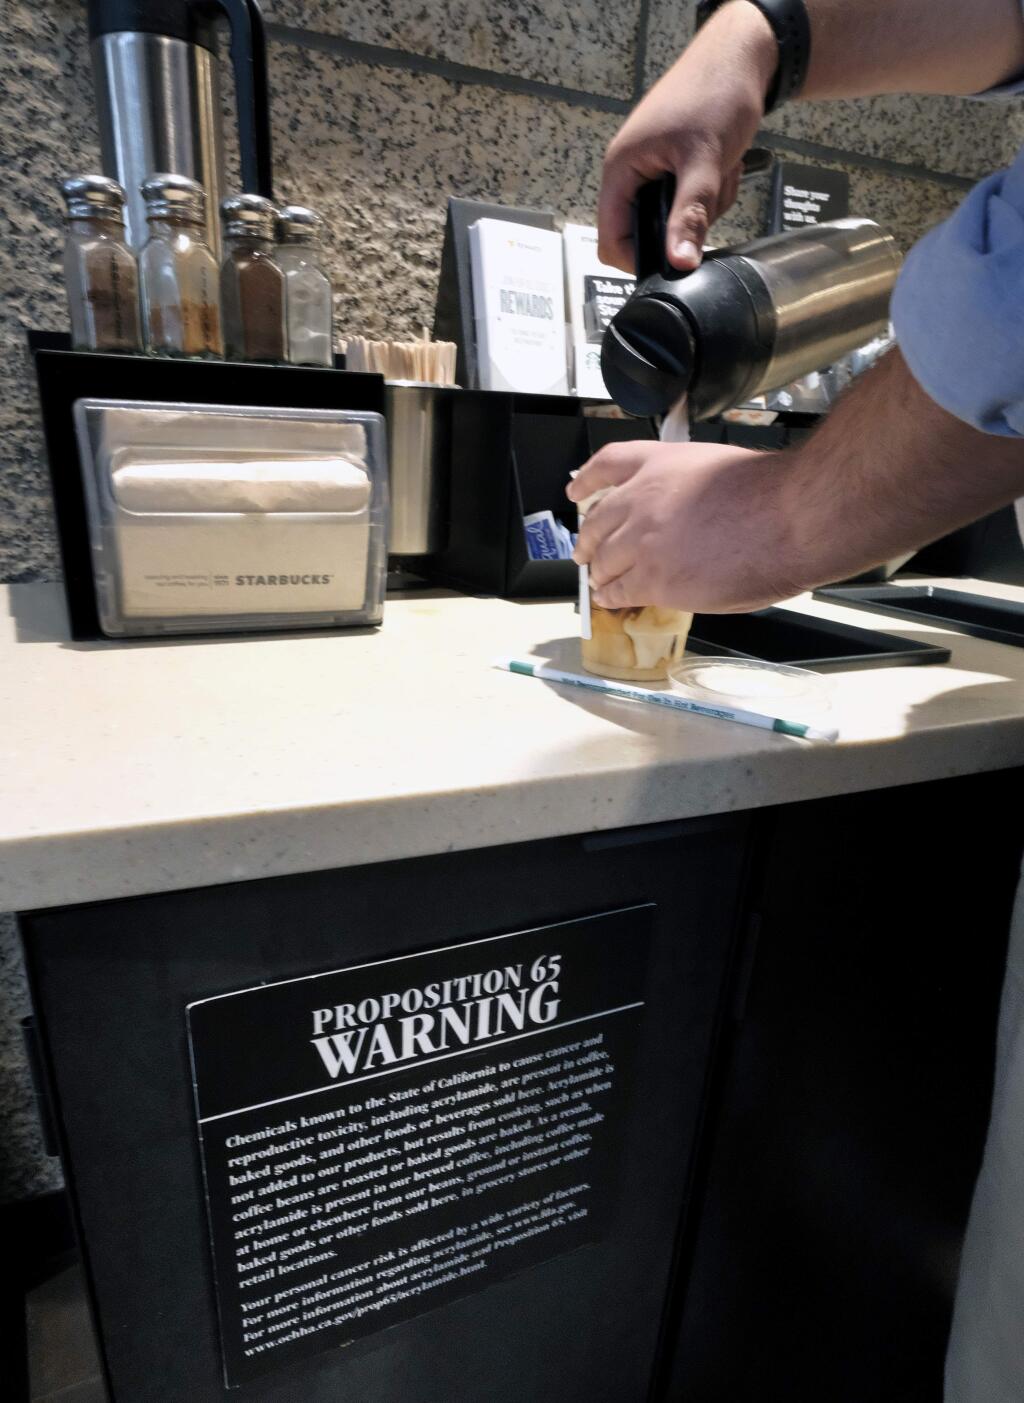 In this photo taken Friday, Sept. 22, 2017, a customer pours milk into coffee near a posted Proposition 65 warning sign at a Starbucks coffee shop in Los Angeles. In a long-running court case playing out in a Los Angeles courtroom, a nonprofit has been presenting evidence to show that coffee companies should post ominous warning labels about a cancer-causing chemical in every cup. (AP Photo/Richard Vogel)